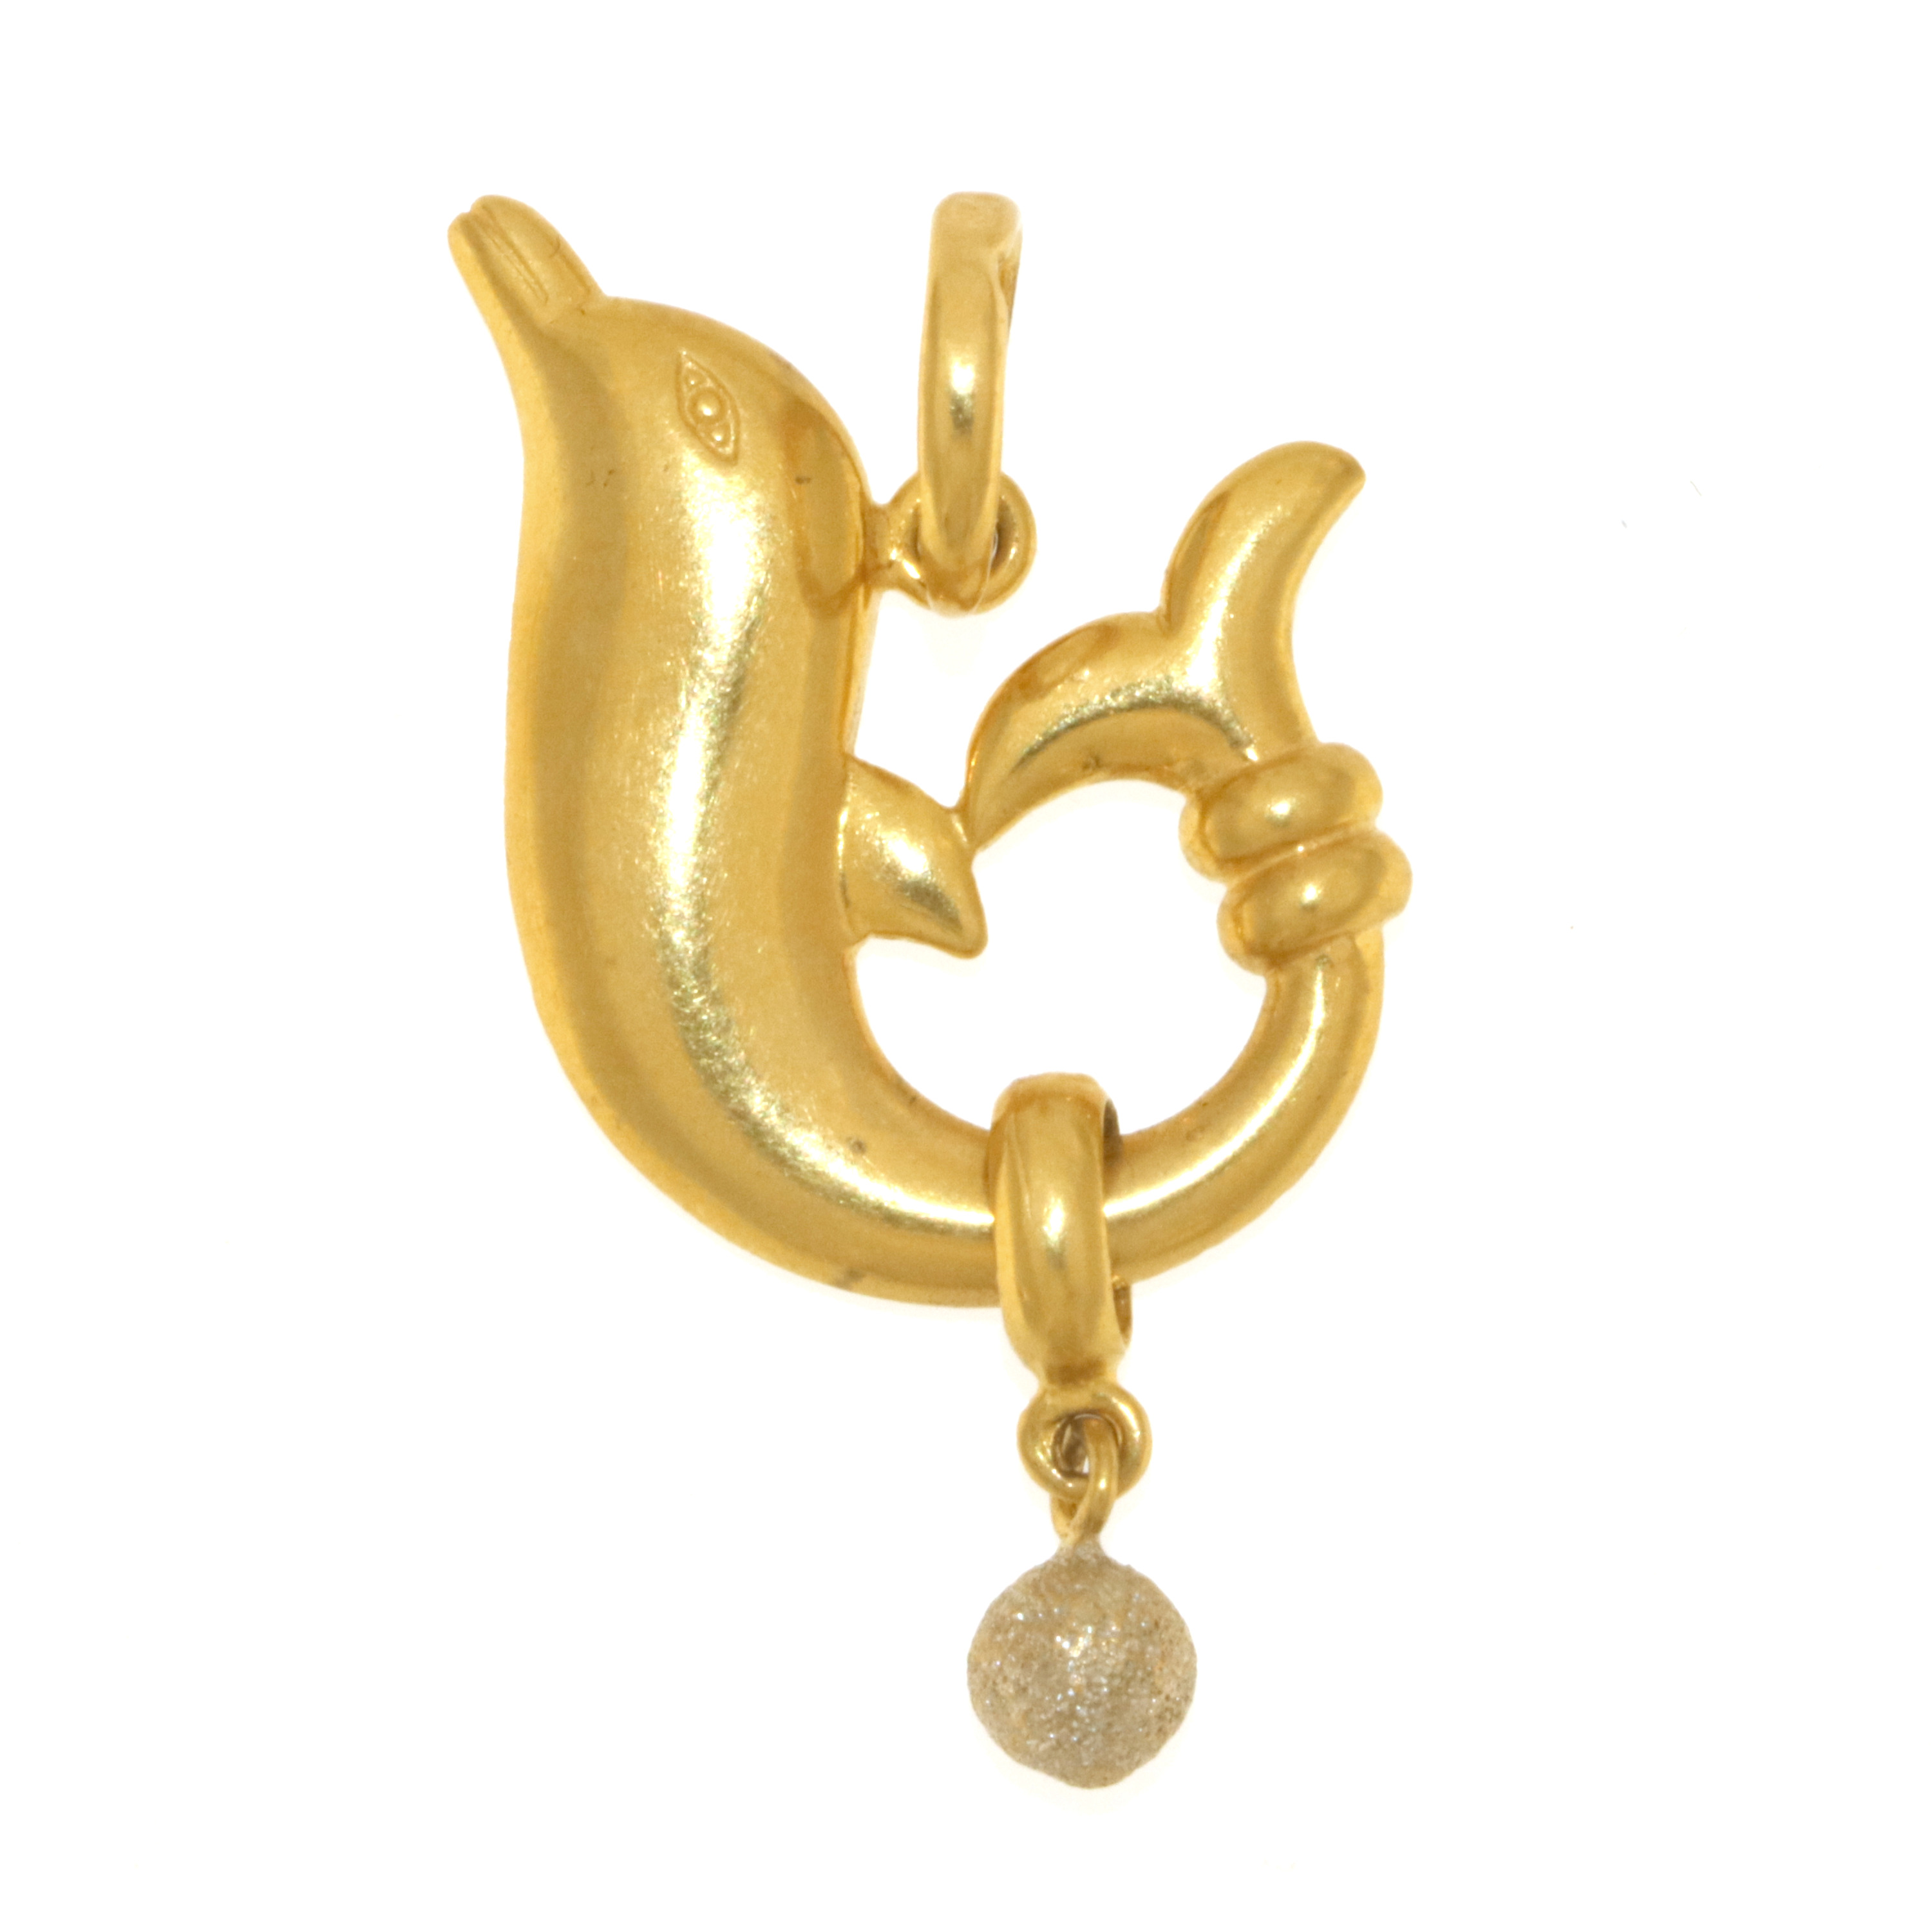 22ct Real Gold Asian/Indian/Pakistani Style Dolphin With Dangling Ball Pendant